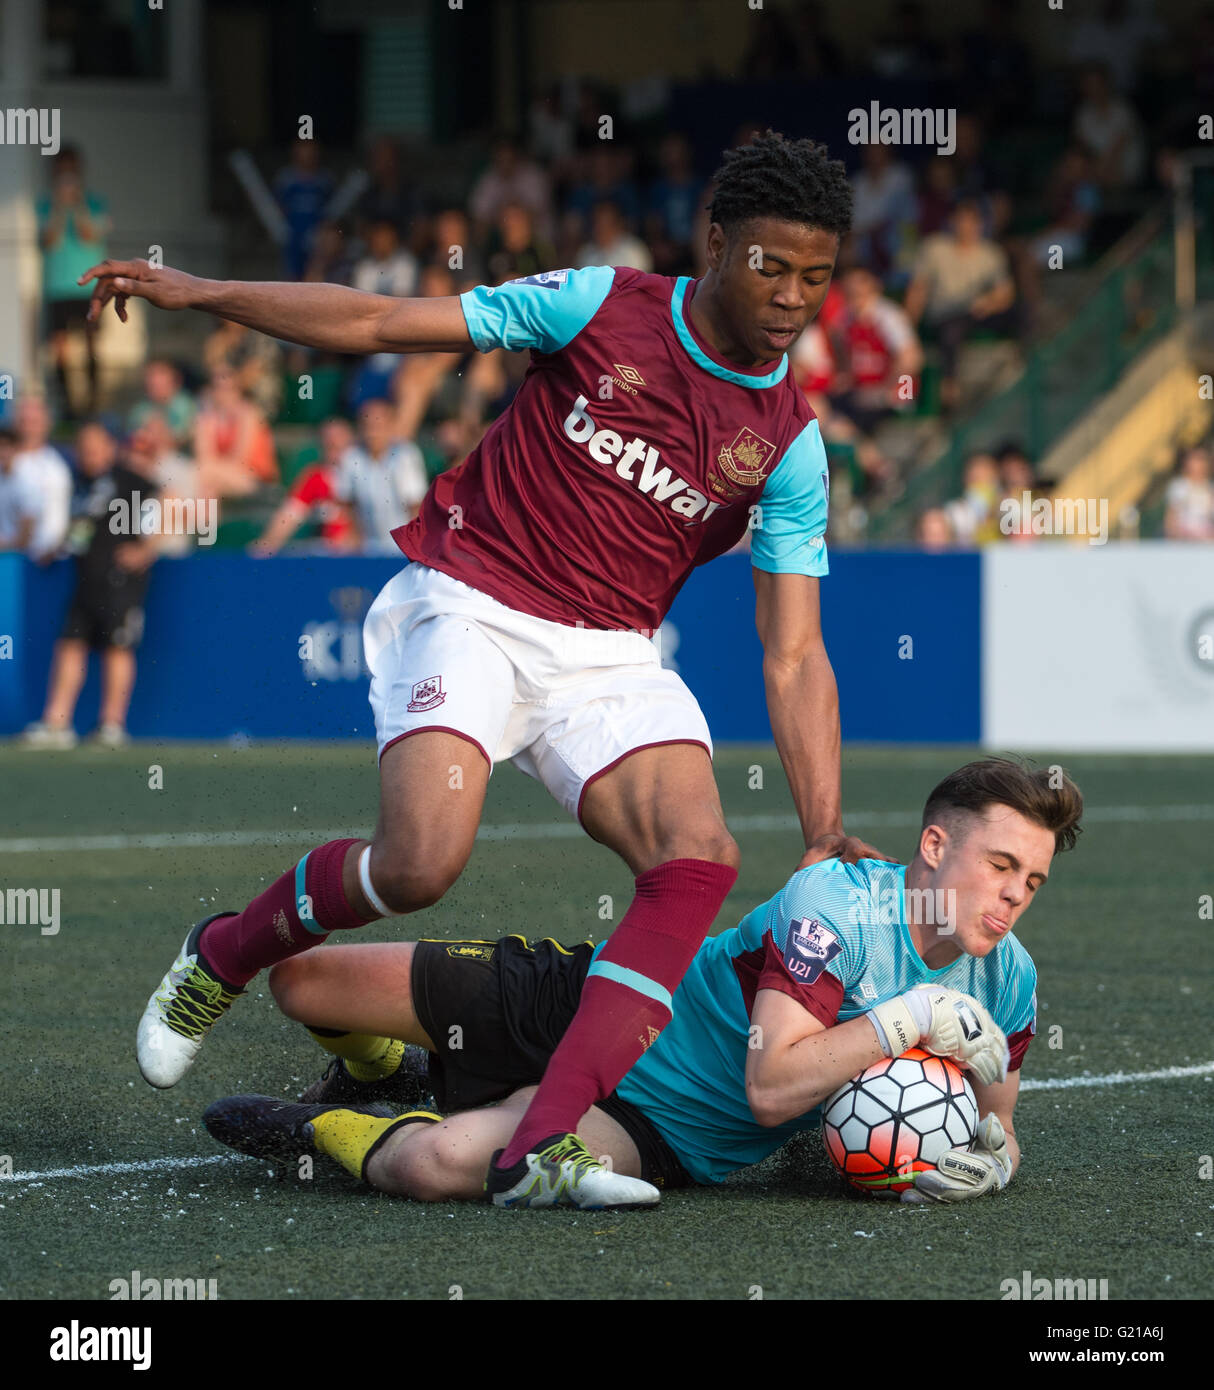 Hong Kong, 22nd May 2016.HKFC Citibank Soccer sevens Cup final Aston Villa vs West Ham United. Aston Villa take the cup. Goalkeeper MATIJA SARKIC is stretchered away after an injury sustained during a great save.He is replaced by MITCH CLARK (Pictured R) who was offered a West Ham United away kit jersey to distinguish him as the goalie for Aston Villa. (L) JAHMAL HECTOR-INGRAM Stock Photo